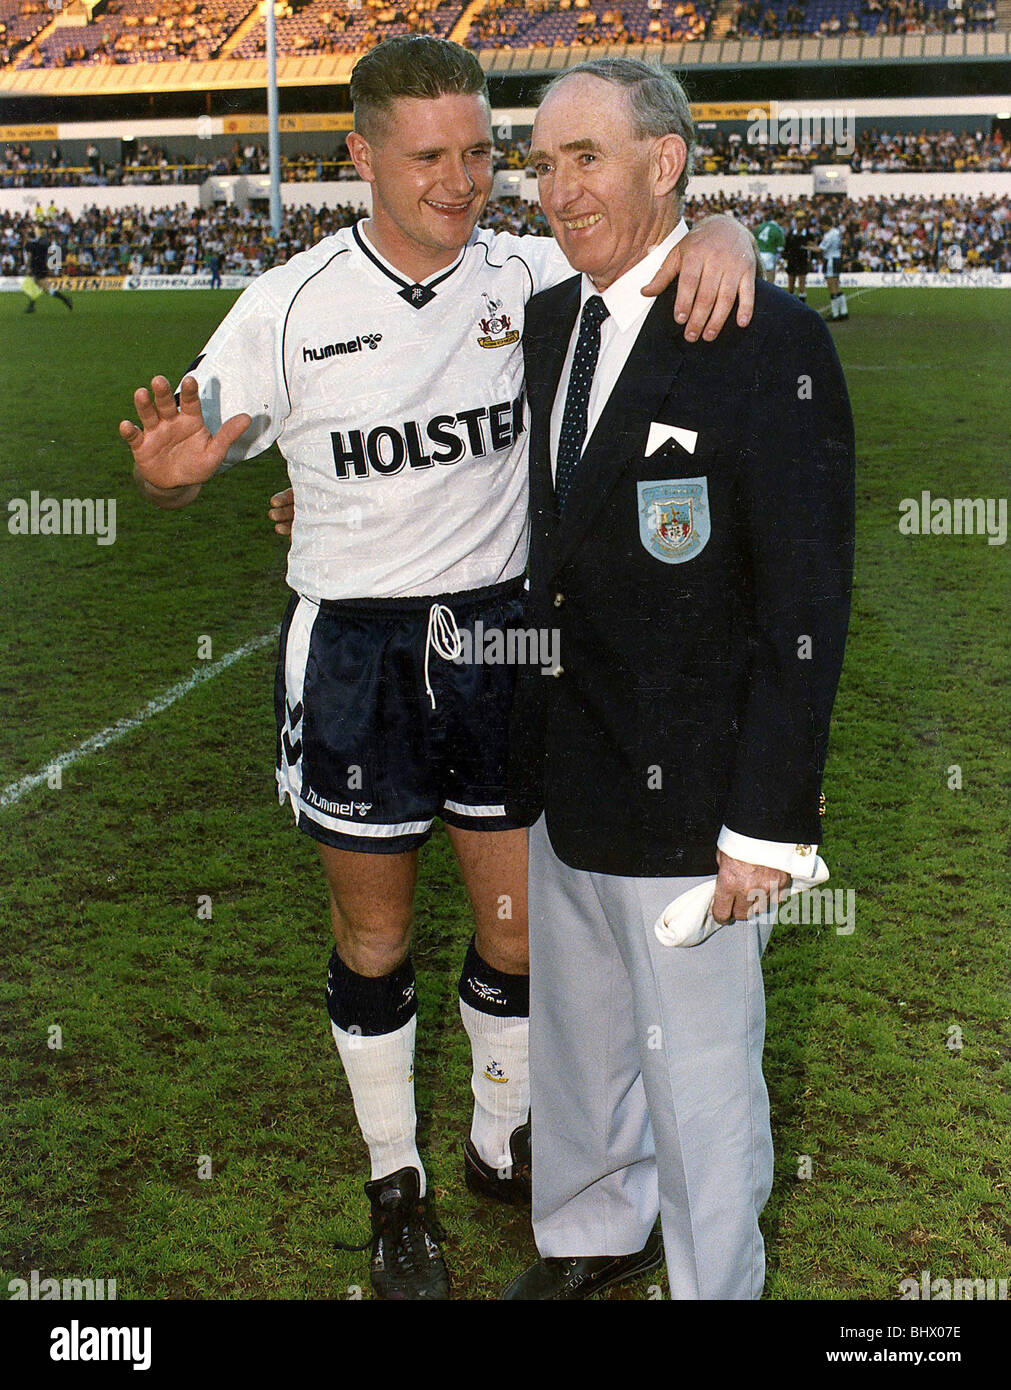 Danny Blanchflower right who played for Tottenham FC with Paul Gascoigne, August 1990. Stock Photo